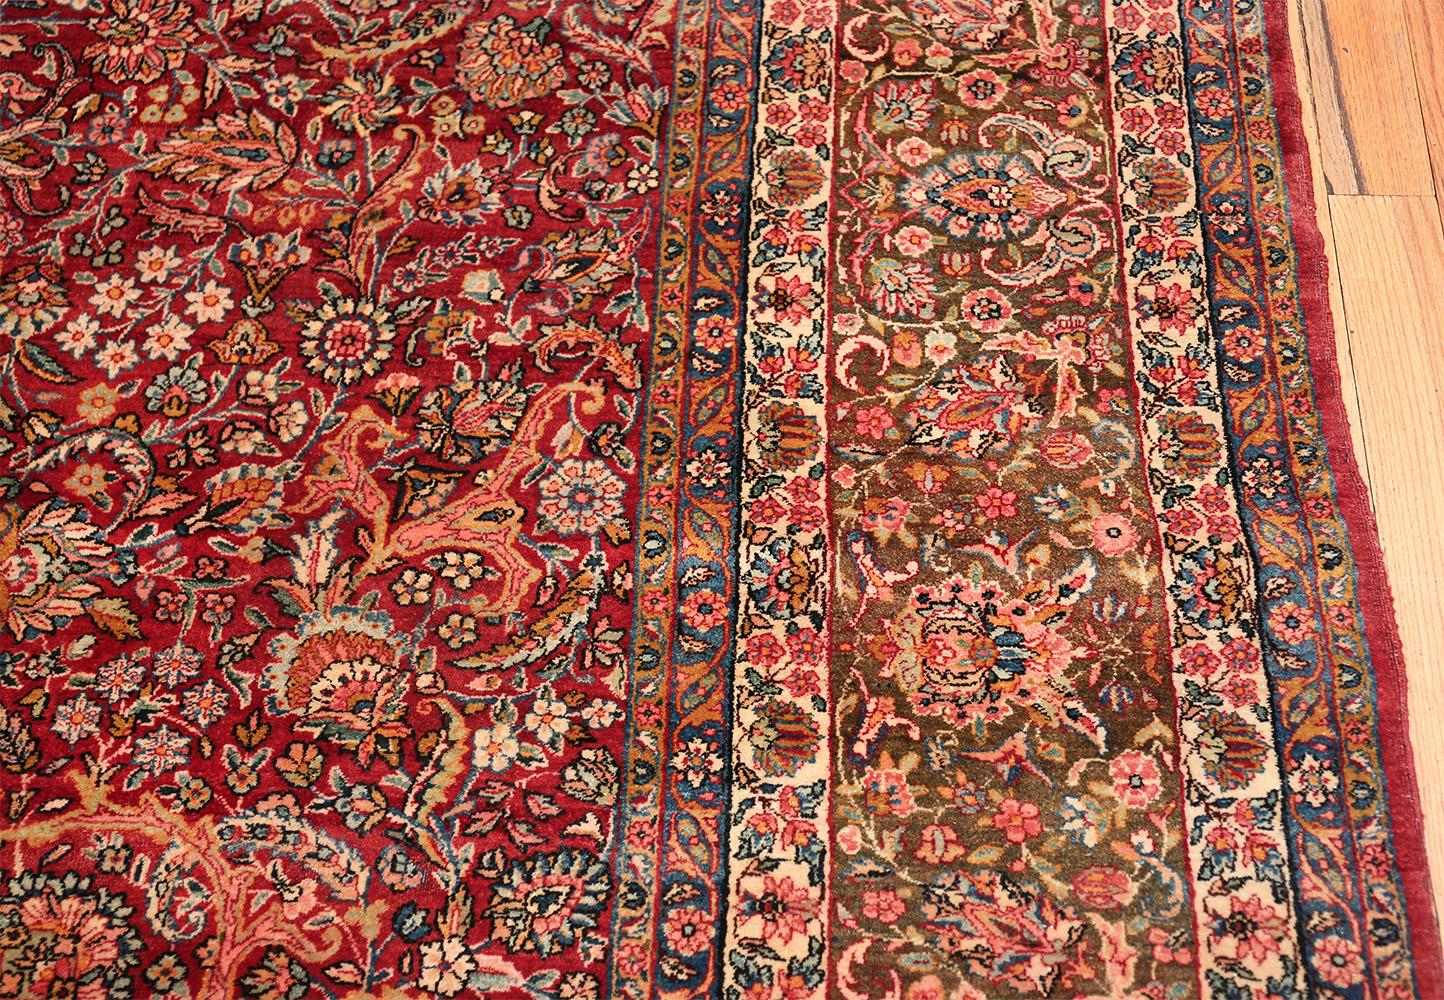 Antique Kerman Persian Rug. Size: 9 ft 9 in x 17 ft 3 in (2.97 m x 5.26 m) 6